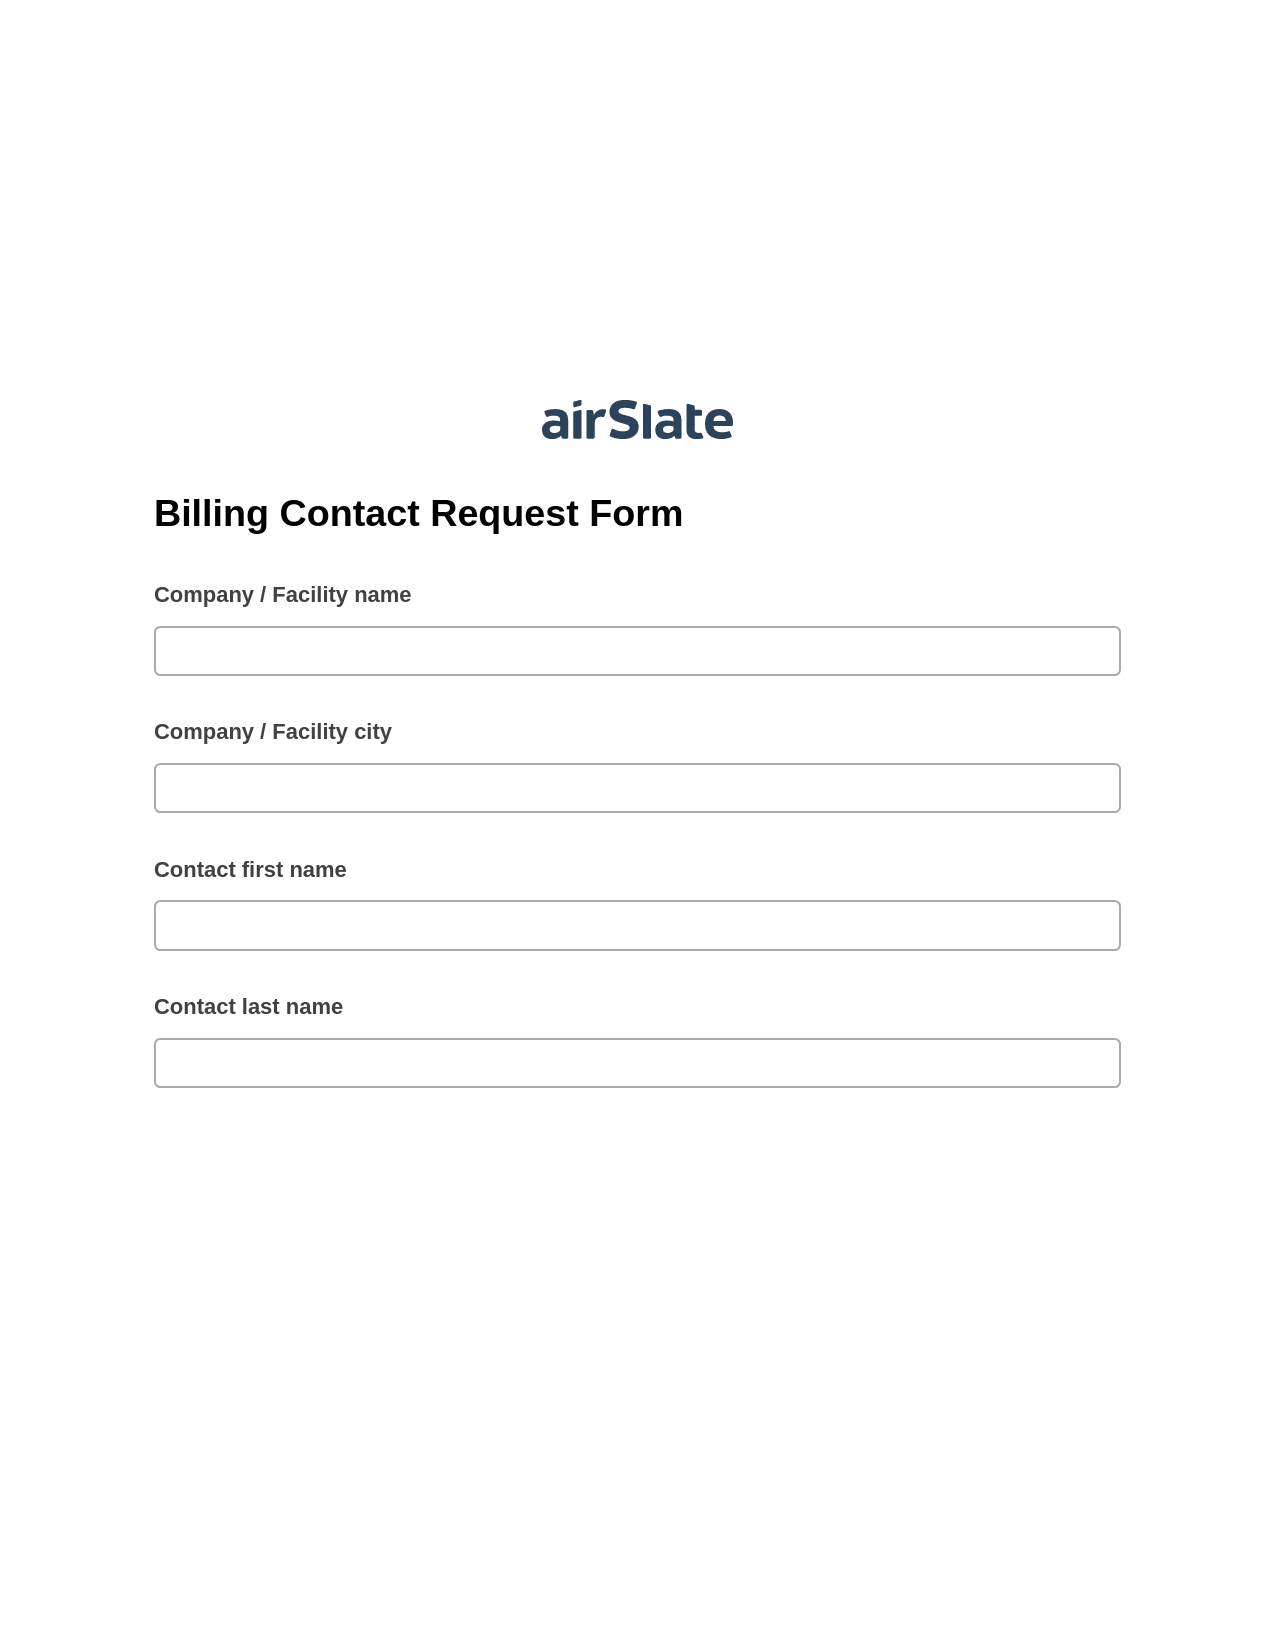 Multirole Billing Contact Request Form Pre-fill from Excel Spreadsheet Bot, Jira Bot, Export to Smartsheet